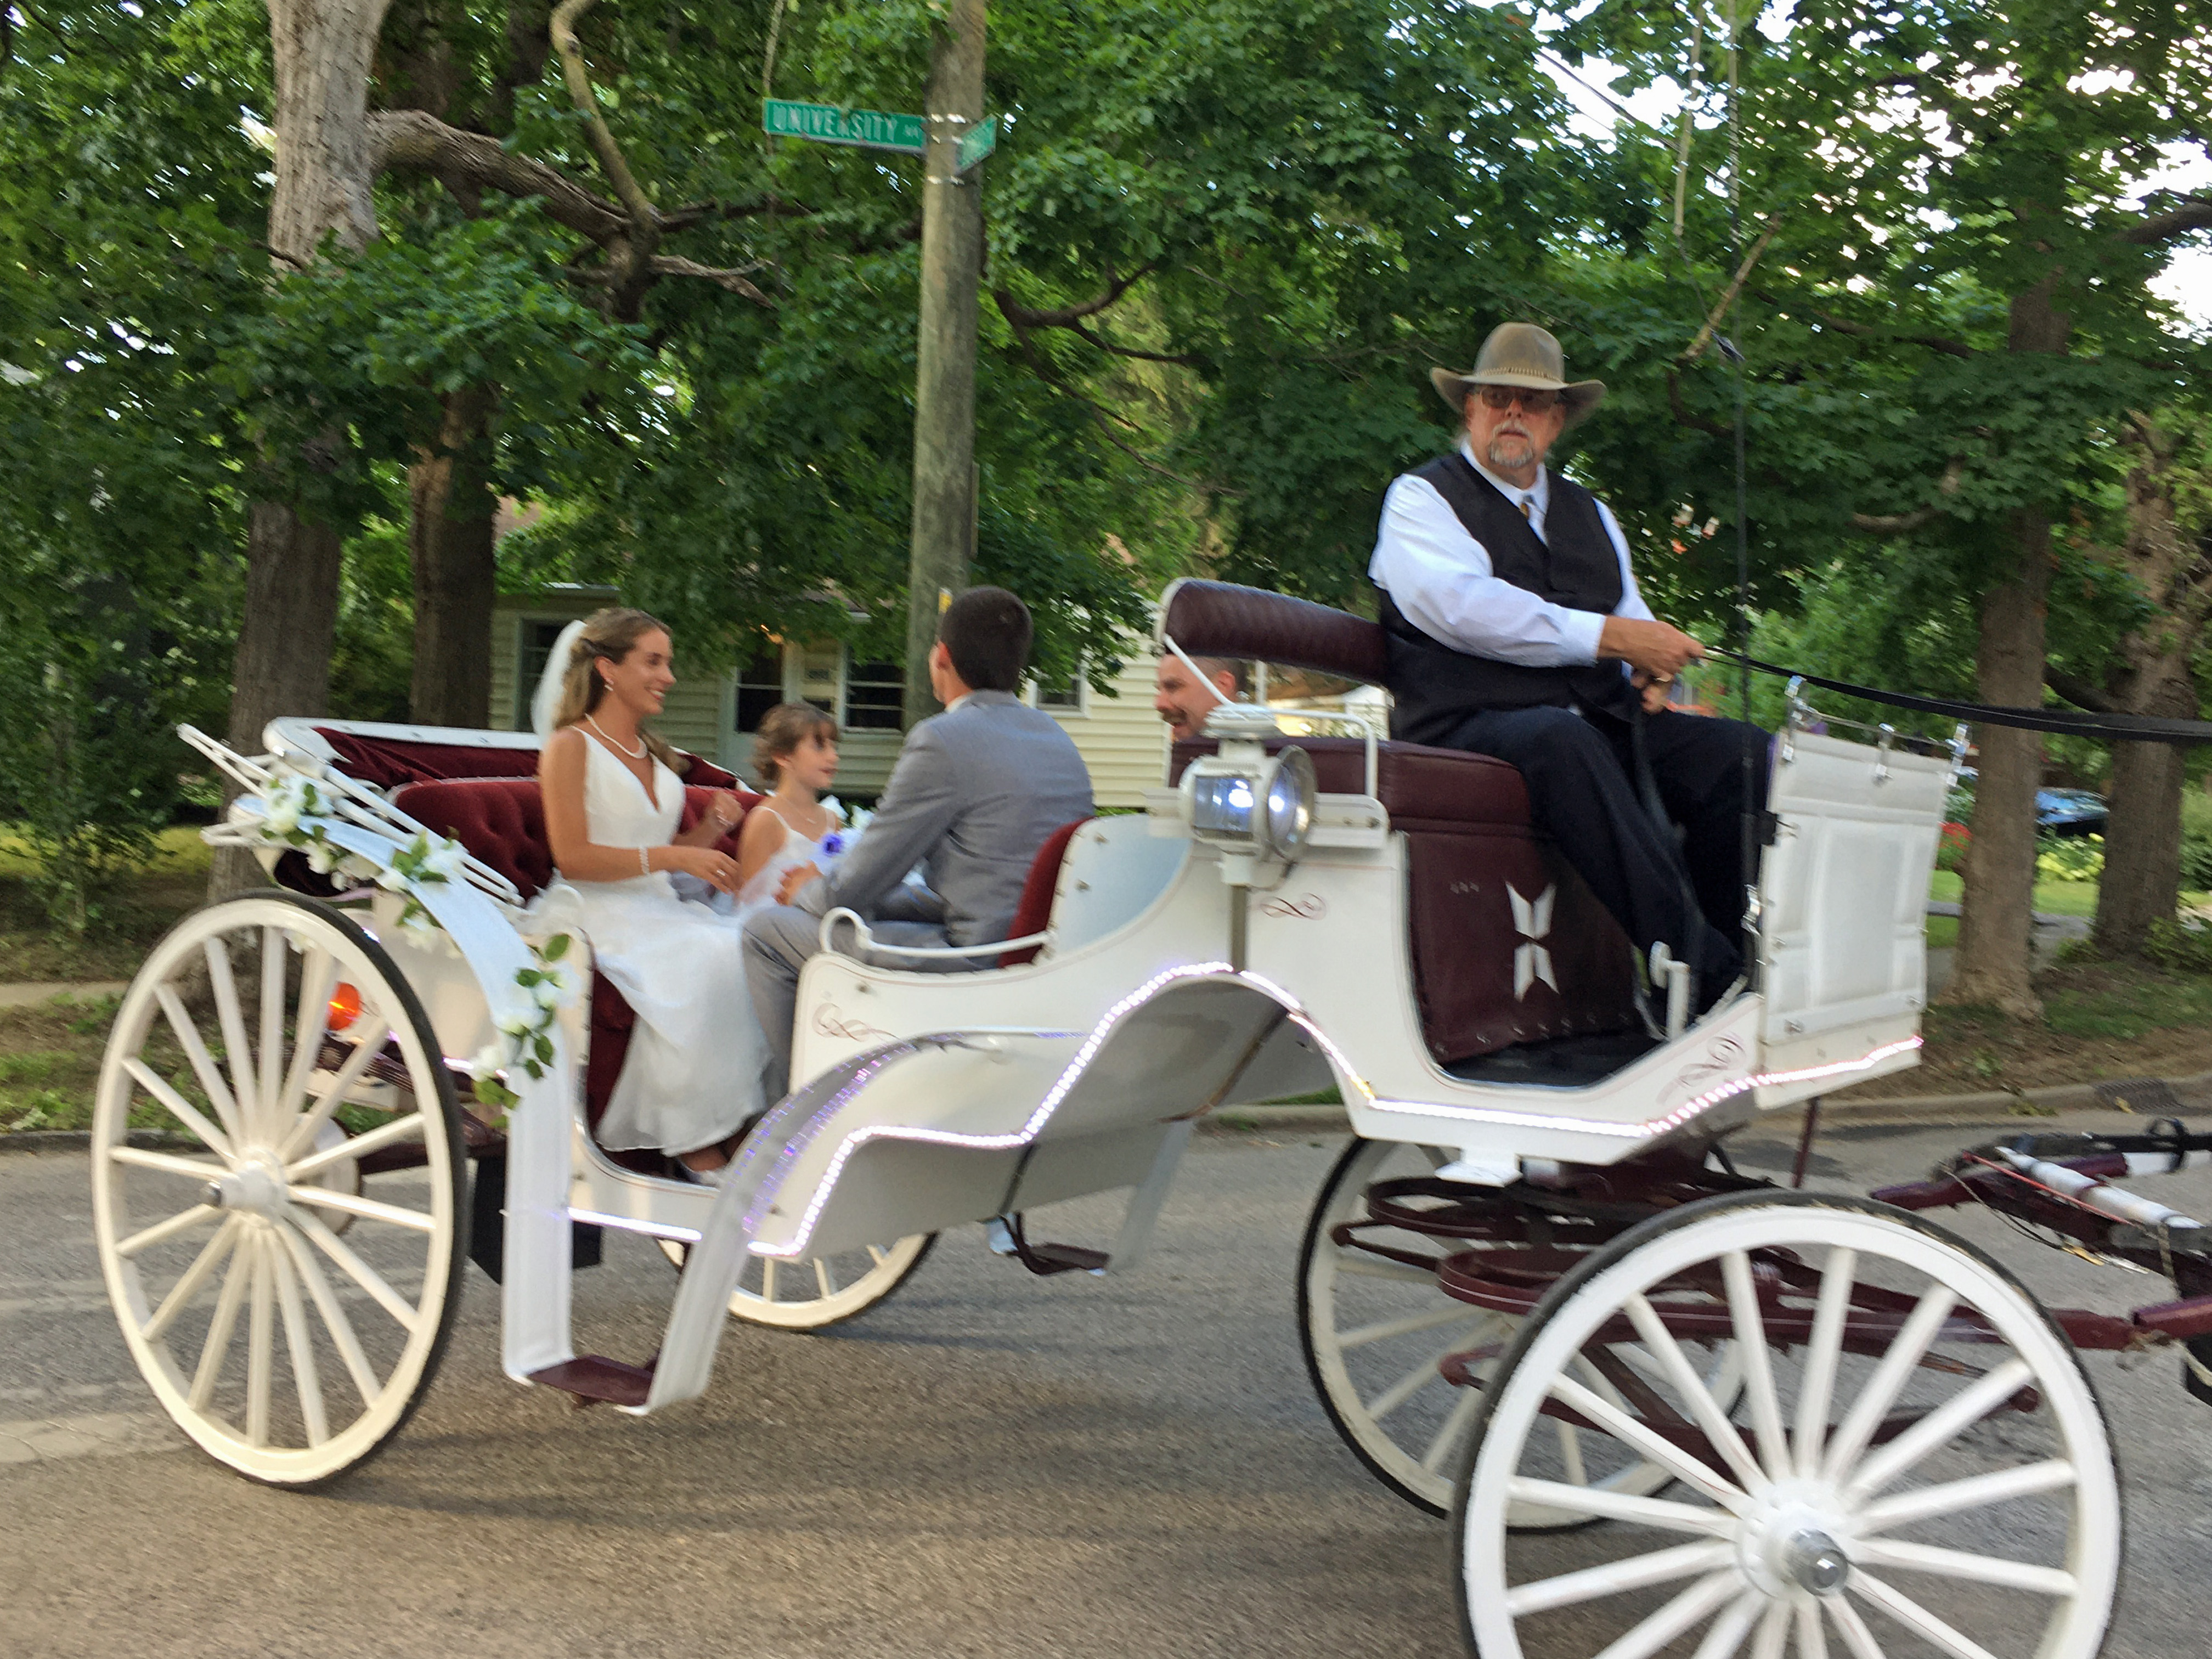 Horse Carriage Ride in Indianapolis, IN